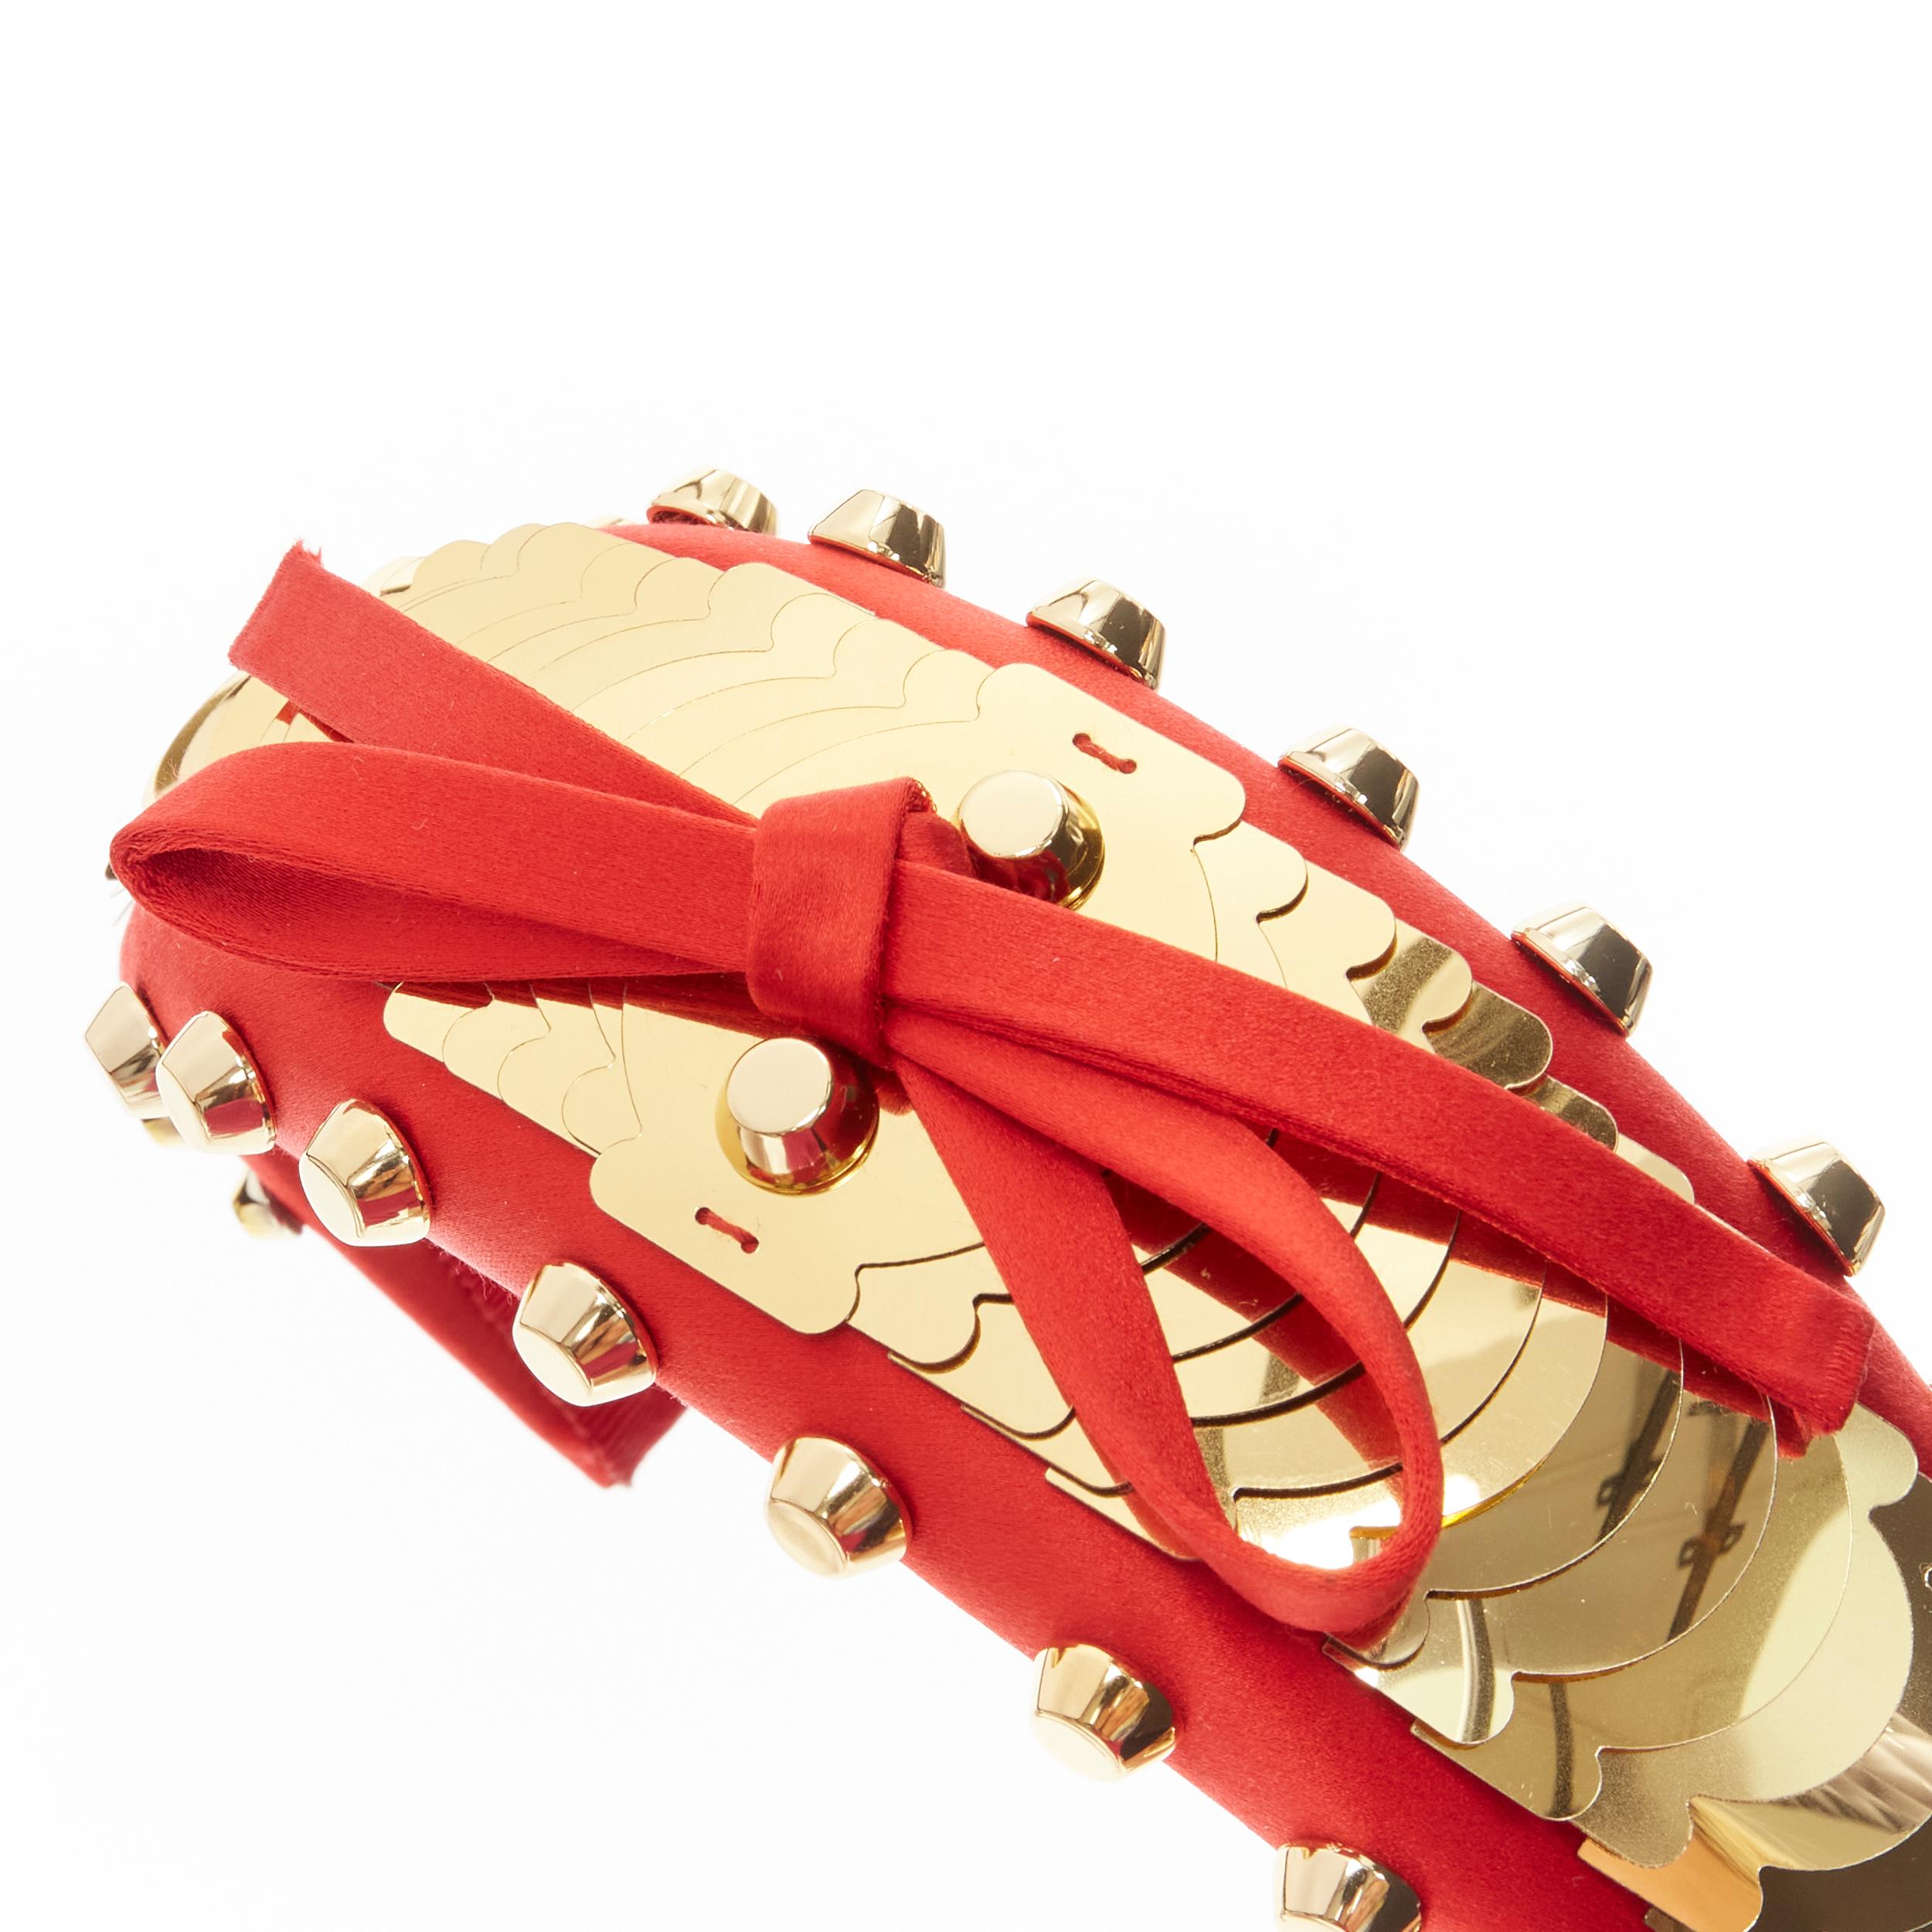 PRADA red satin gold pailette studded bow puffy headband 
Reference: ANWU/A00125 
Brand: Prada 
Designer: Miuccia Prada 
Material: Satin 
Color: Red 
Pattern: Solid 
Extra Detail: Decorative bow at top. 
Made in: Italy 


CONDITION: 
Condition: